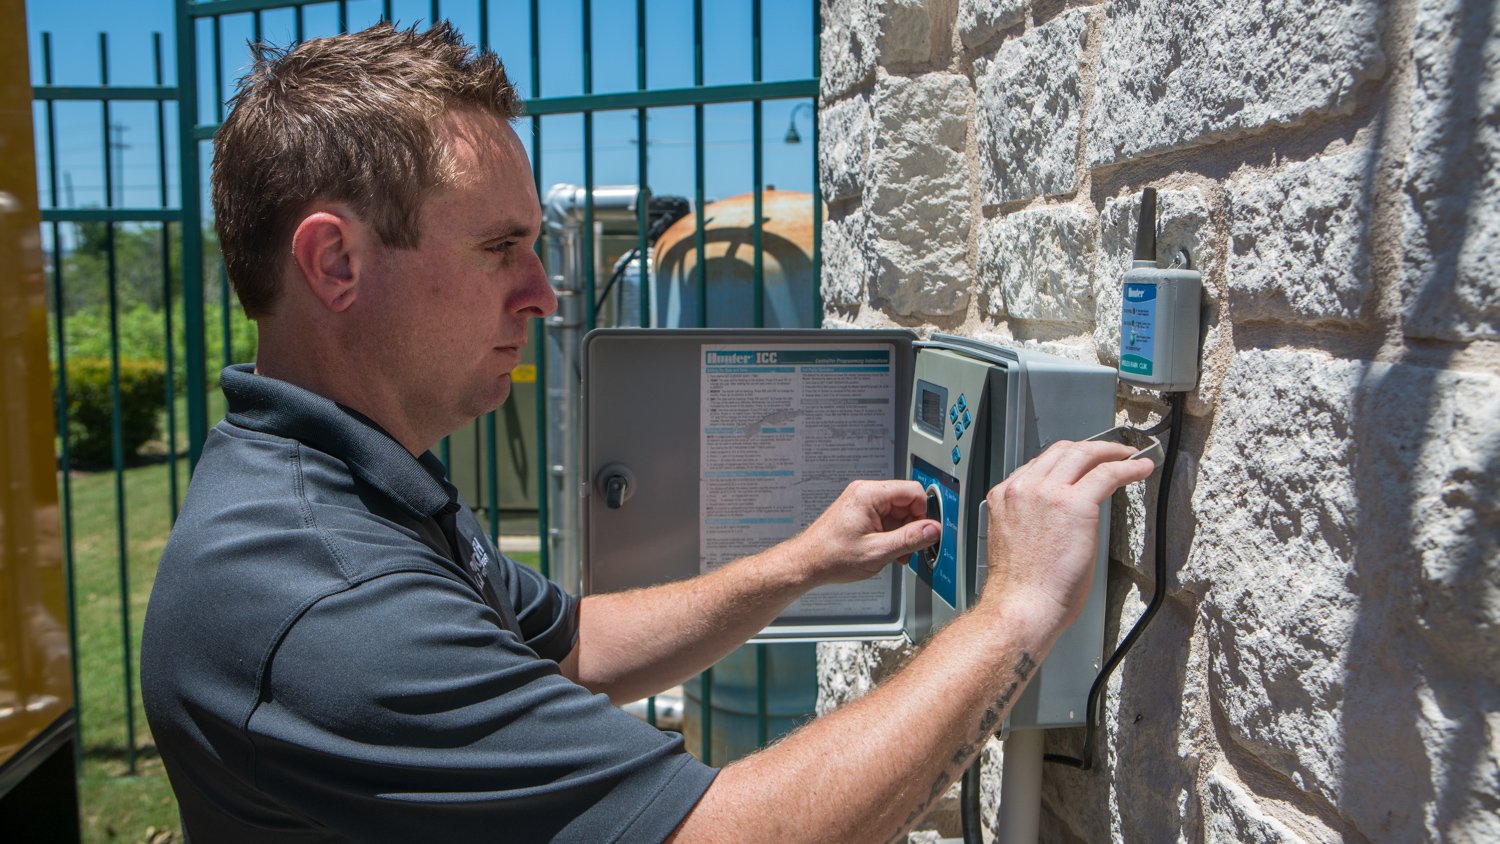 Irrigation technician checking control panel and run times